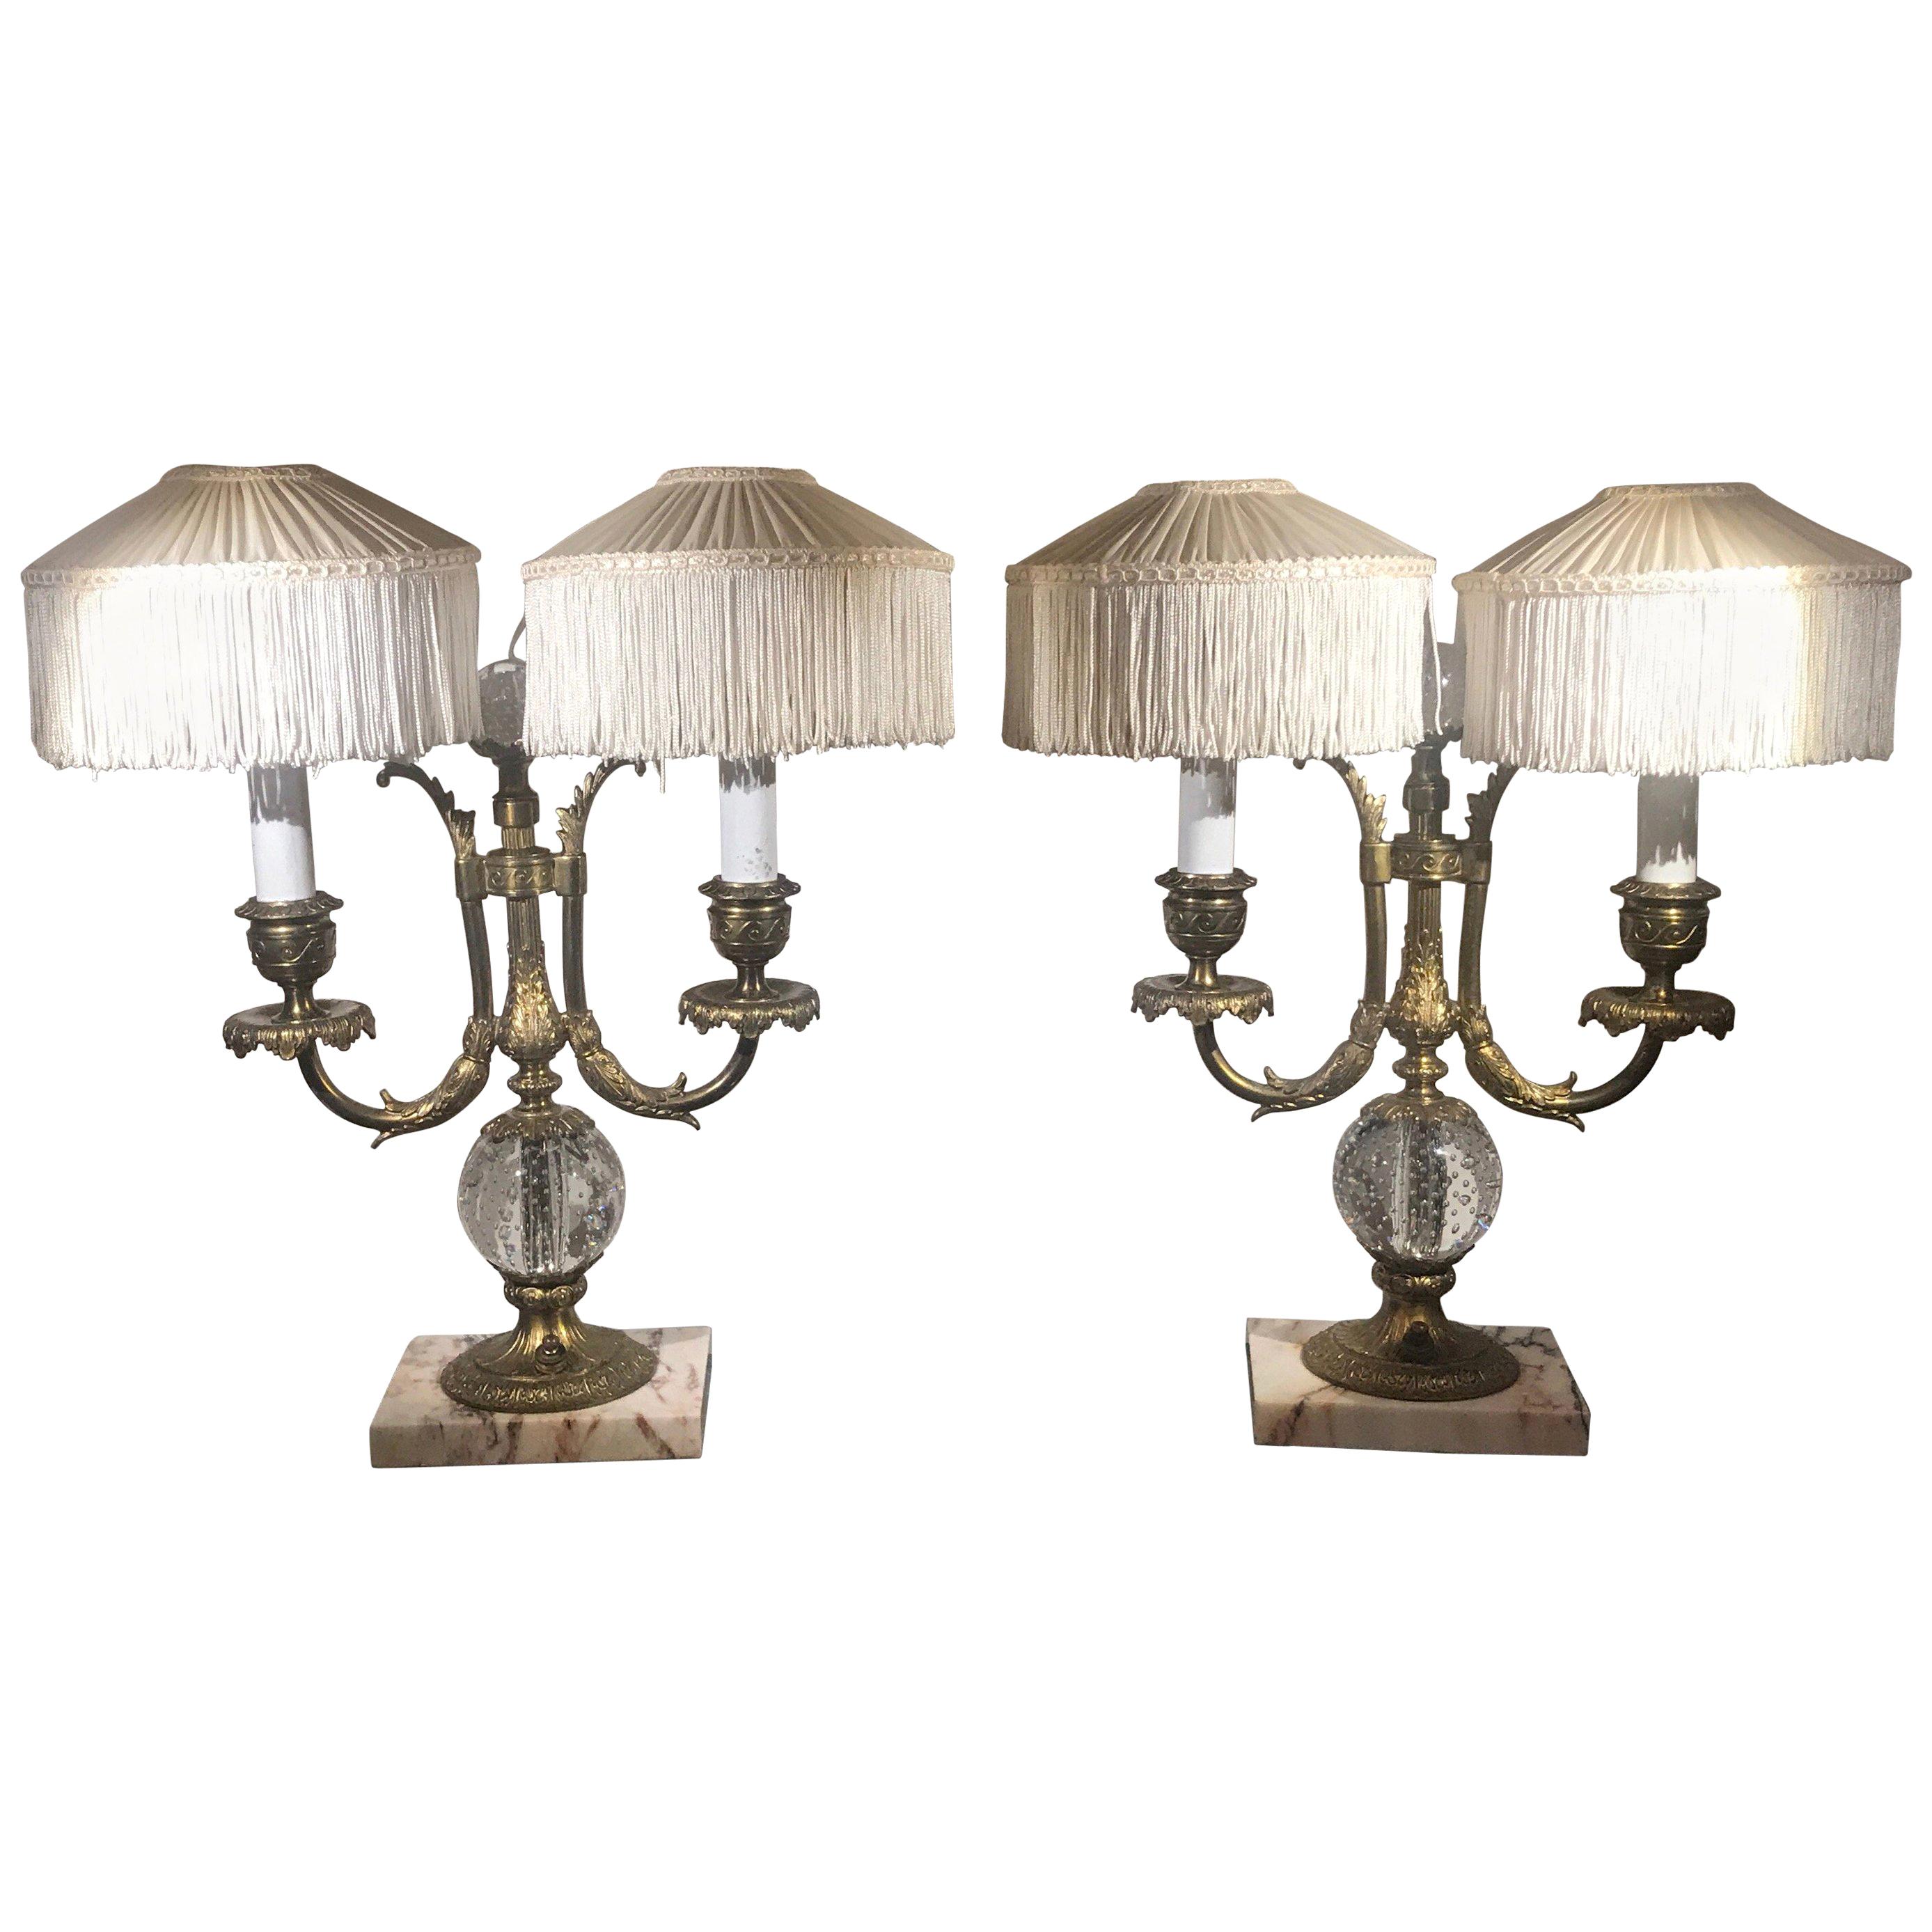 Pair of Pairpoint Lamps, circa 1910